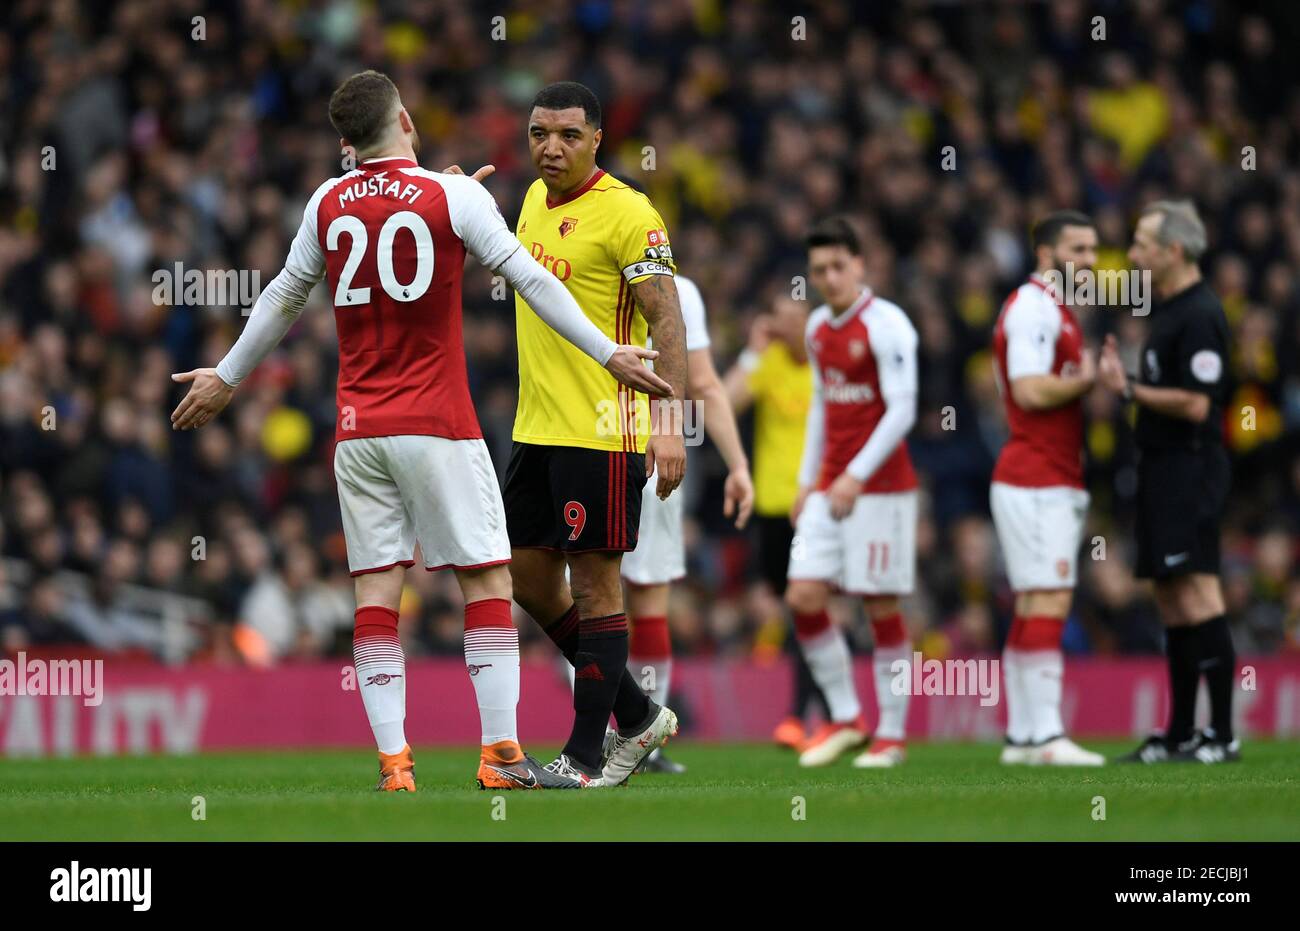 Soccer Football - Premier League - Arsenal vs Watford - Emirates Stadium, London, Britain - March 11, 2018   Watford's Troy Deeney talks to Arsenal's Shkodran Mustafi            Action Images via Reuters/Tony O'Brien    EDITORIAL USE ONLY. No use with unauthorized audio, video, data, fixture lists, club/league logos or 'live' services. Online in-match use limited to 75 images, no video emulation. No use in betting, games or single club/league/player publications.  Please contact your account representative for further details. Stock Photo